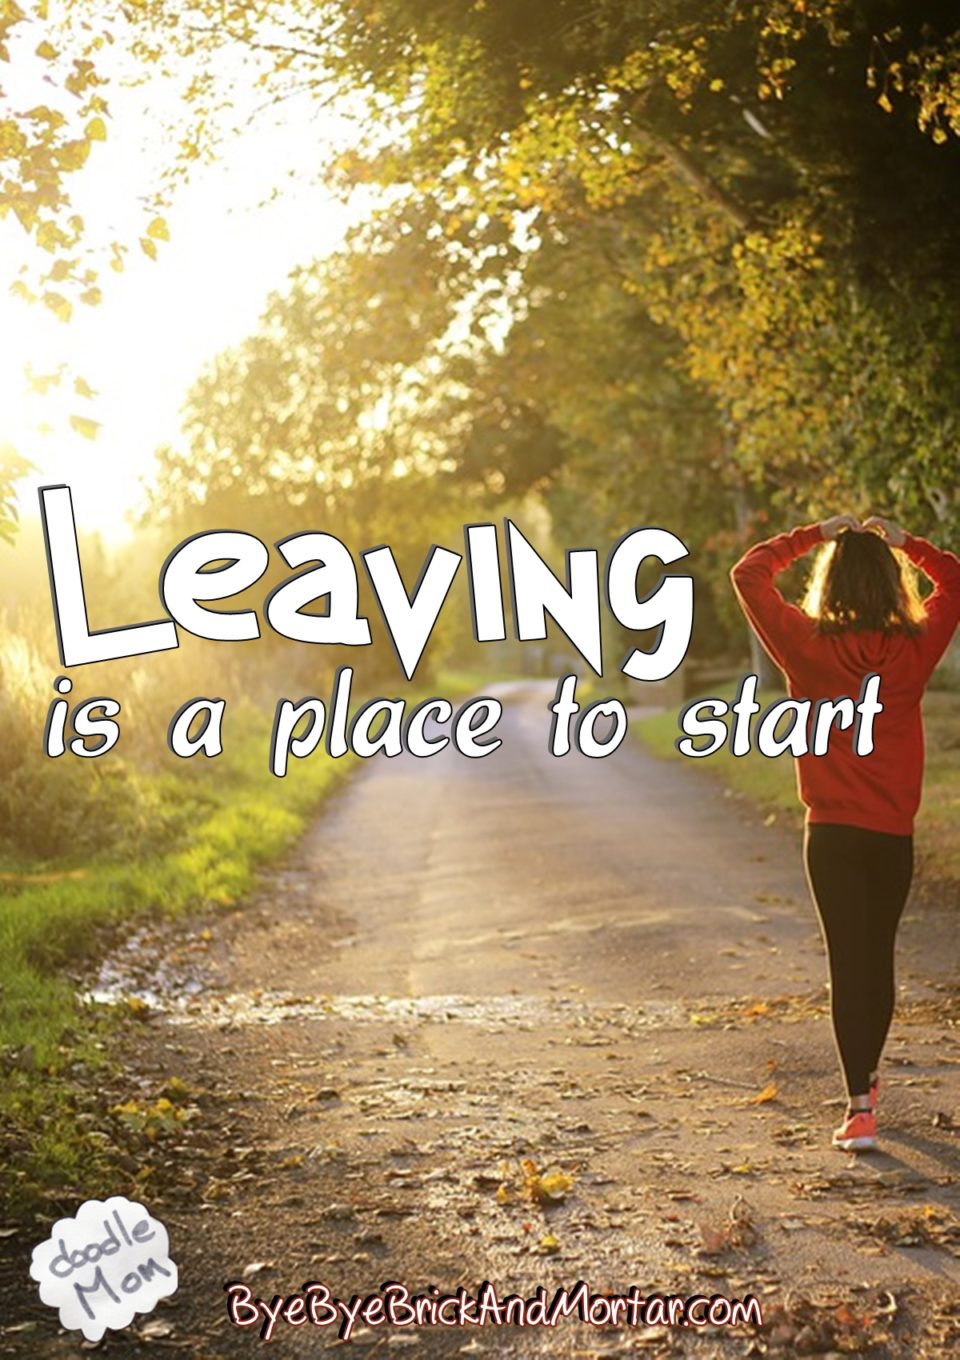 Leaving is a place to start